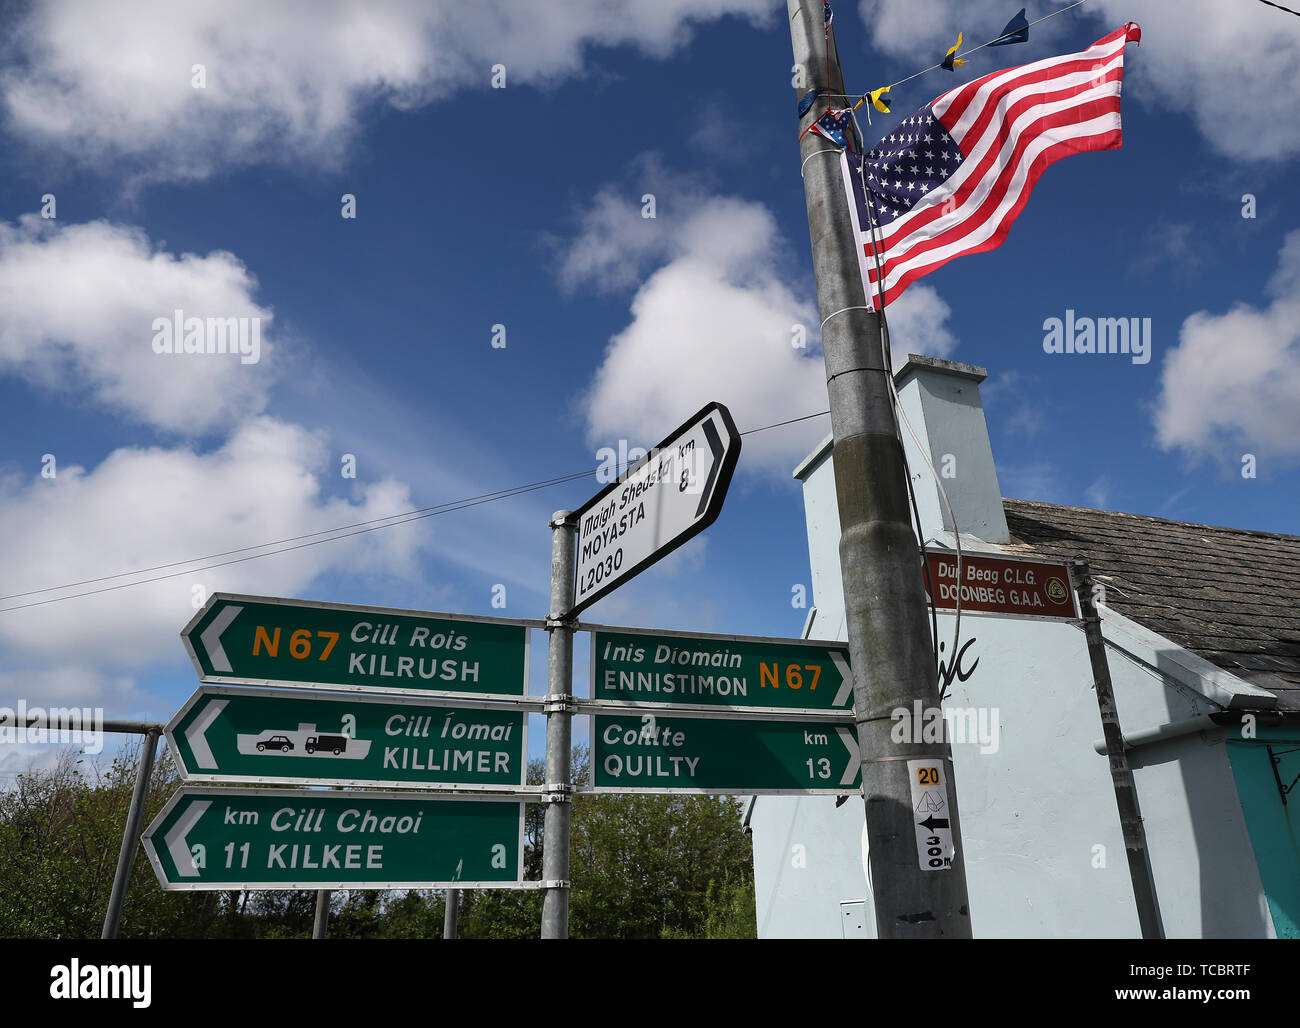 A USA flag flies in the village of Doonbeg, Co Clare, during the visit of US President Donald Trump. Stock Photo